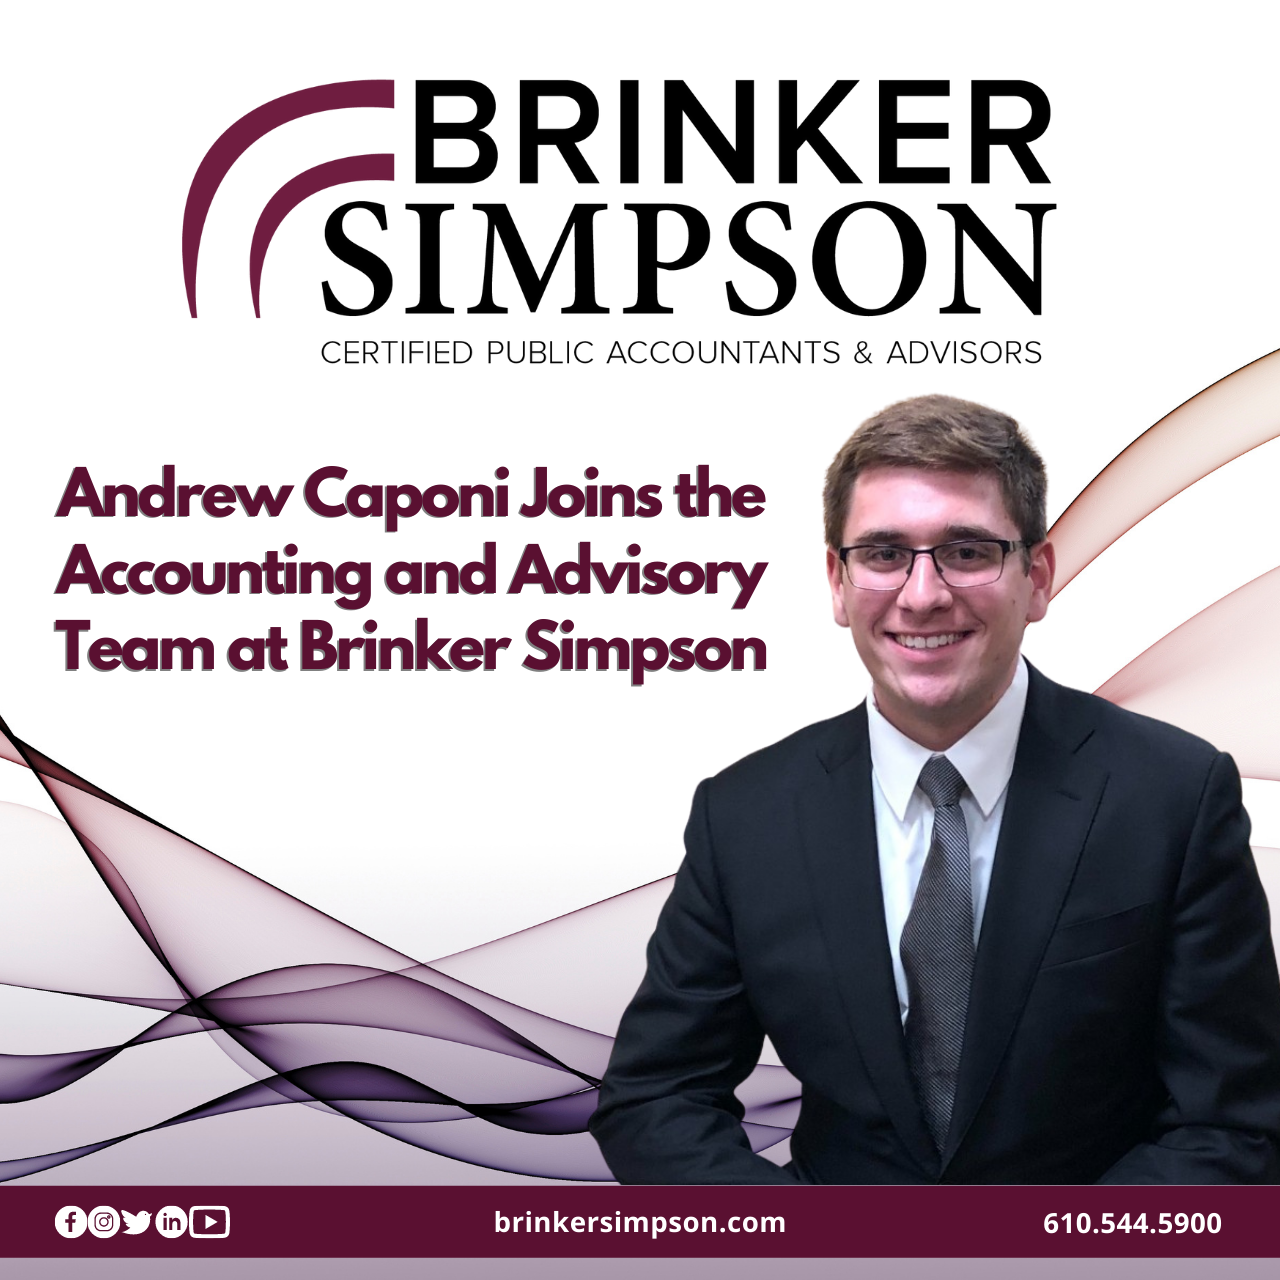 Andrew Caponi Joins the Accounting & Advisory Team at Brinker Simpson